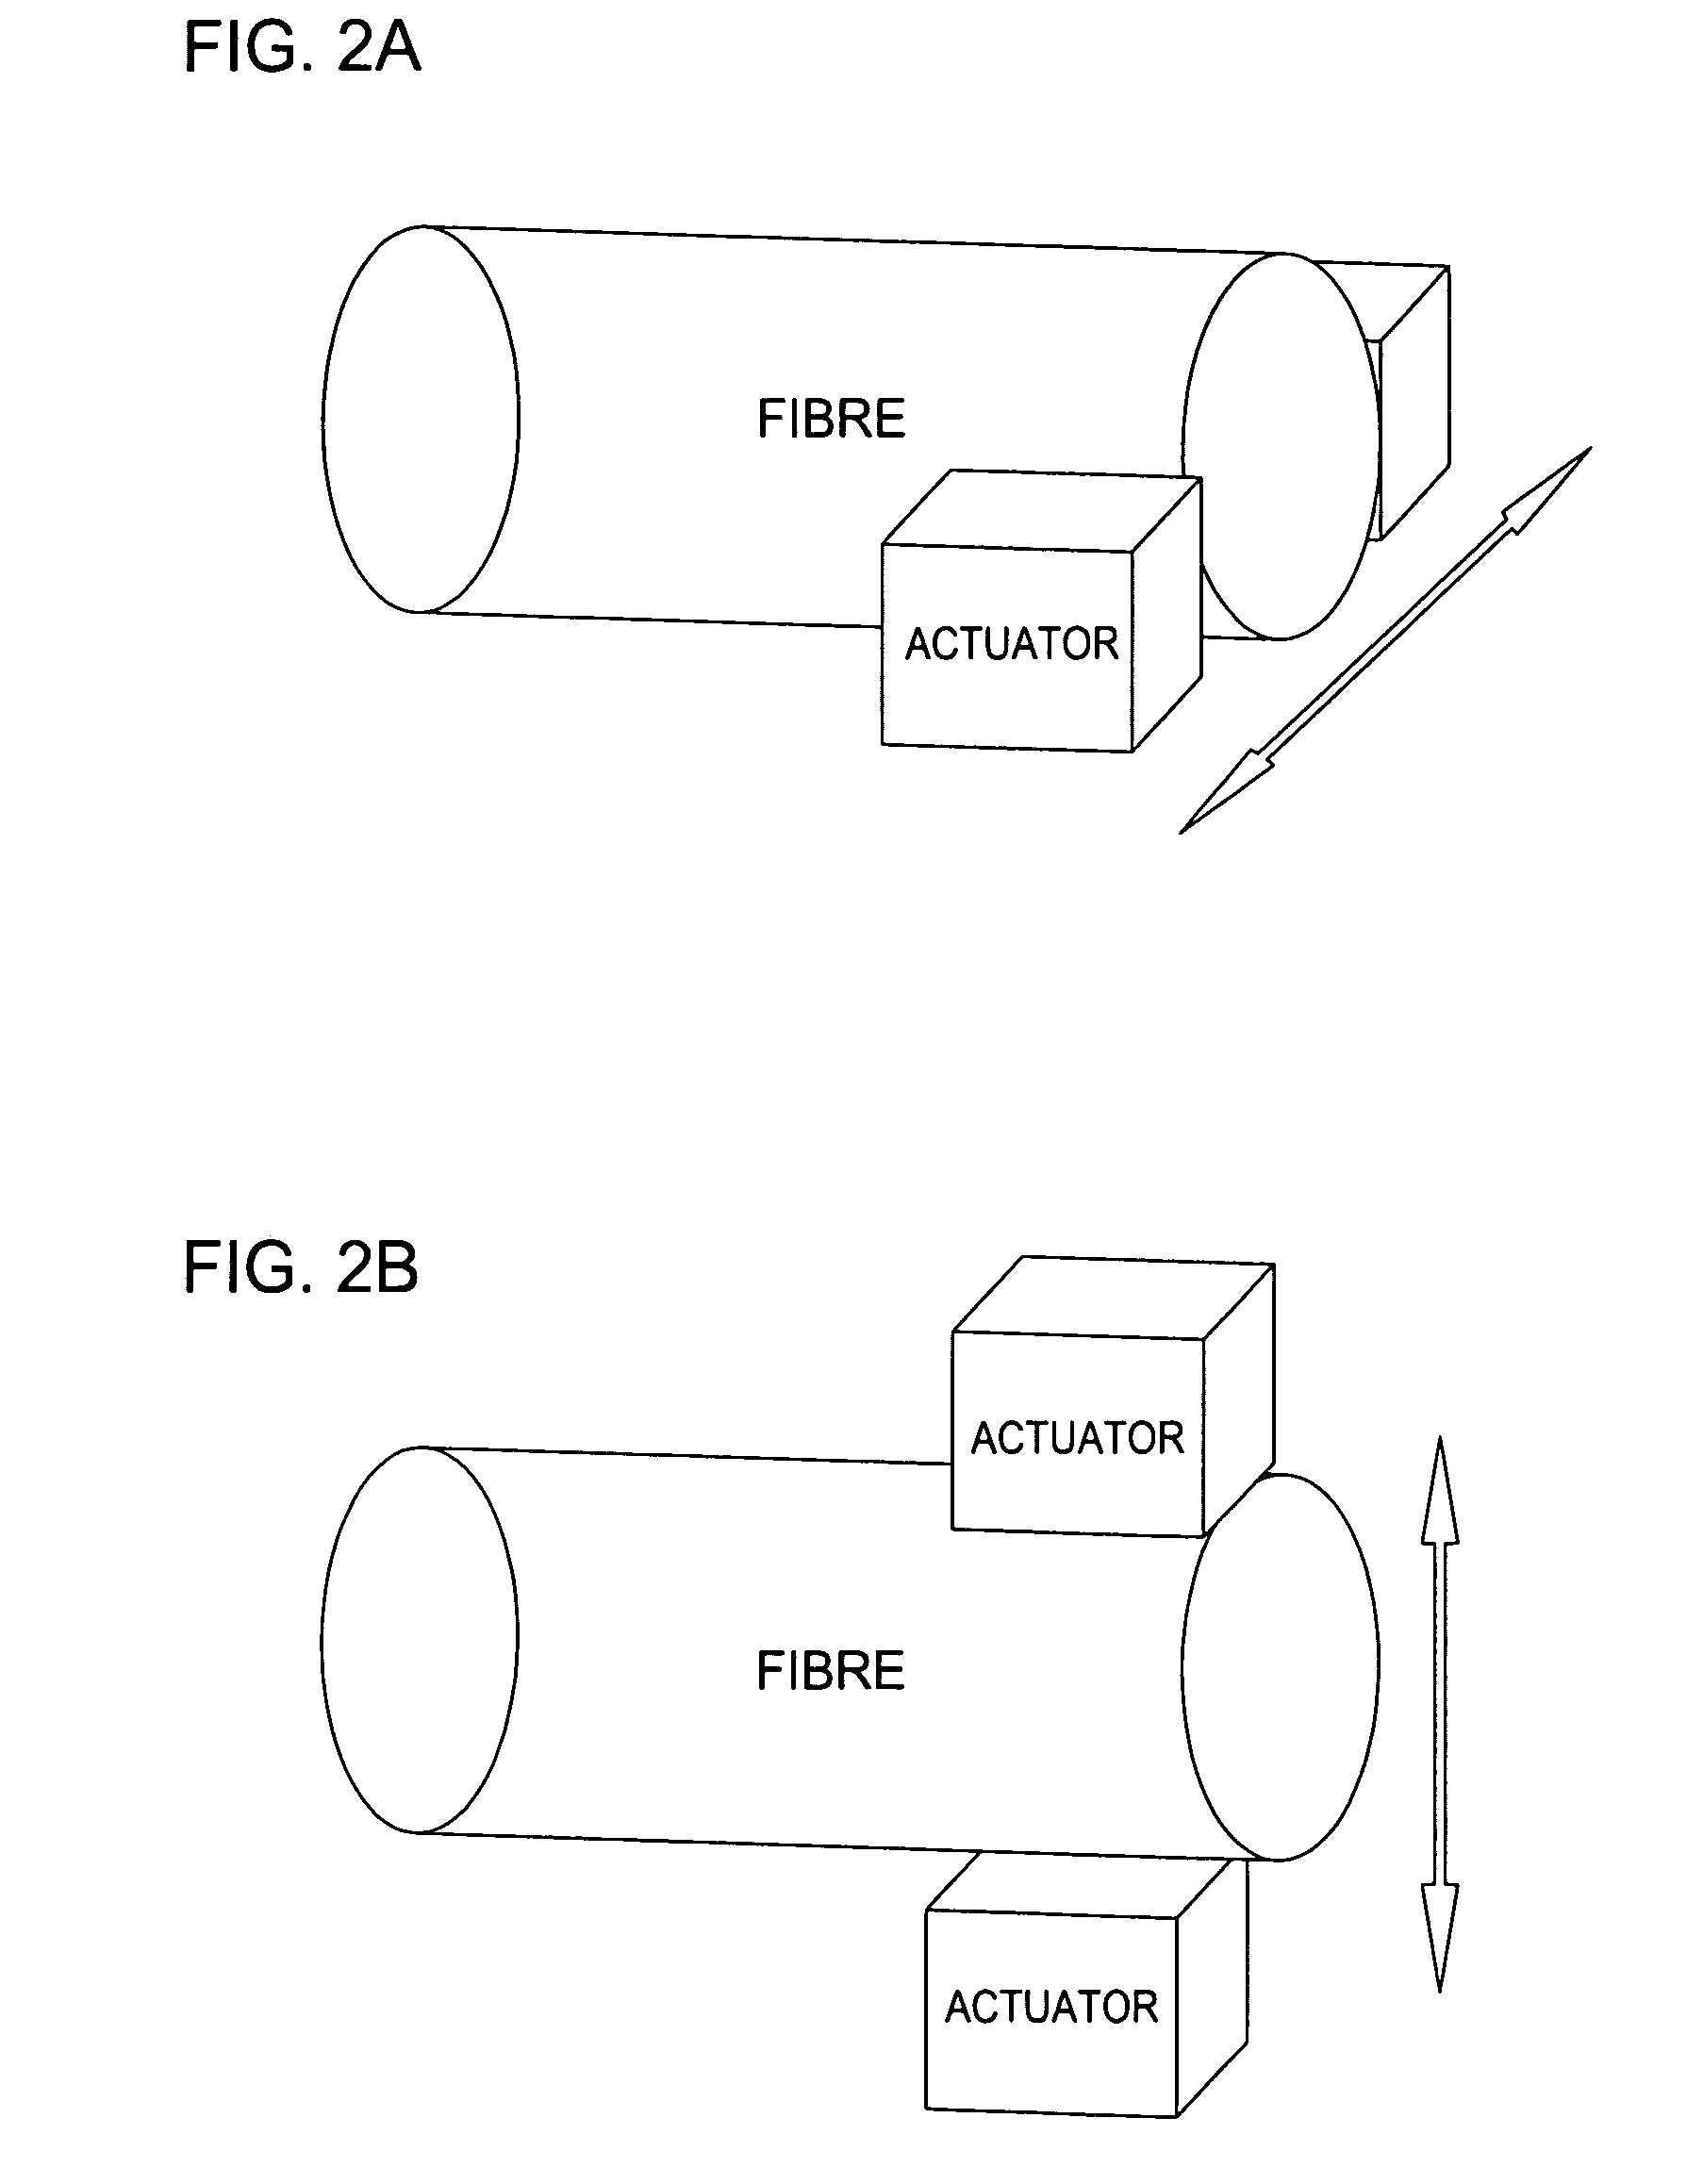 Method, apparatus and system for self-aligning components, sub-assemblies and assemblies